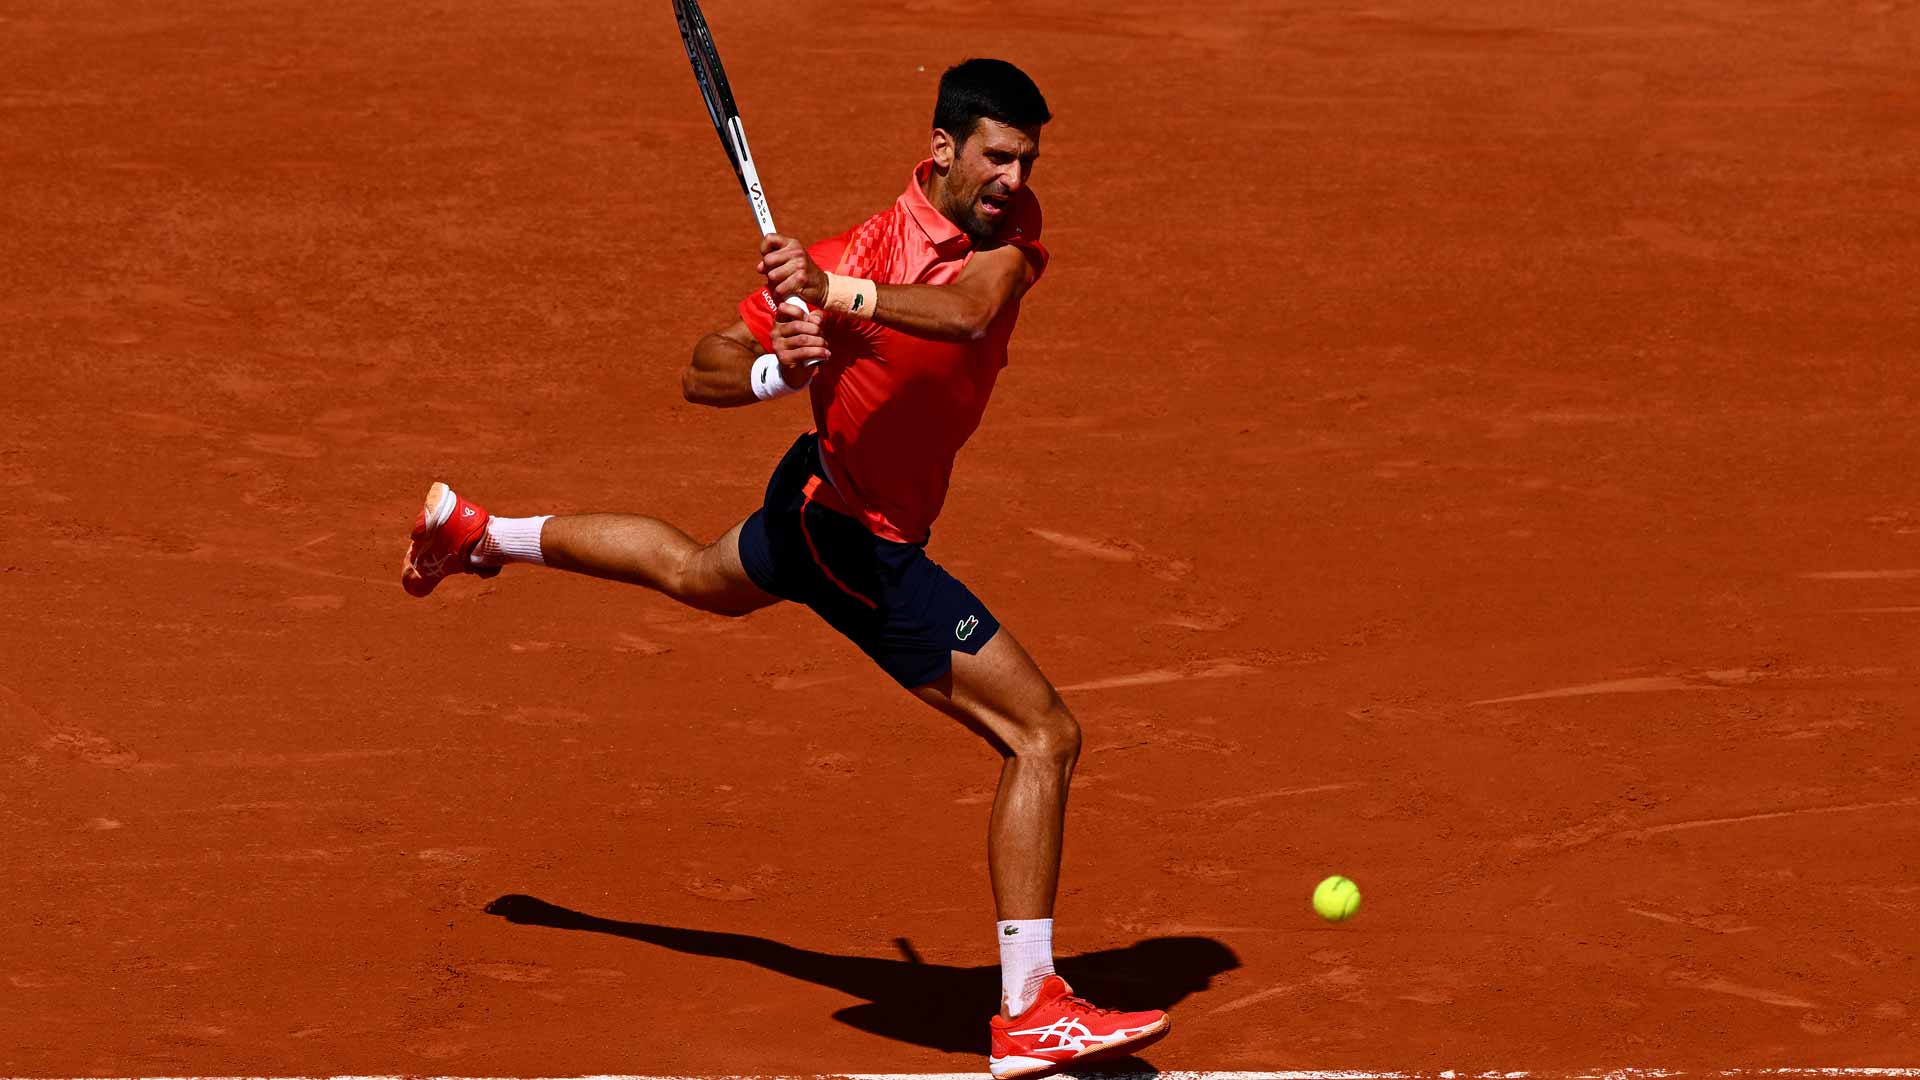 Novak Djokovic is aiming for his third Roland Garros title this fortnight.